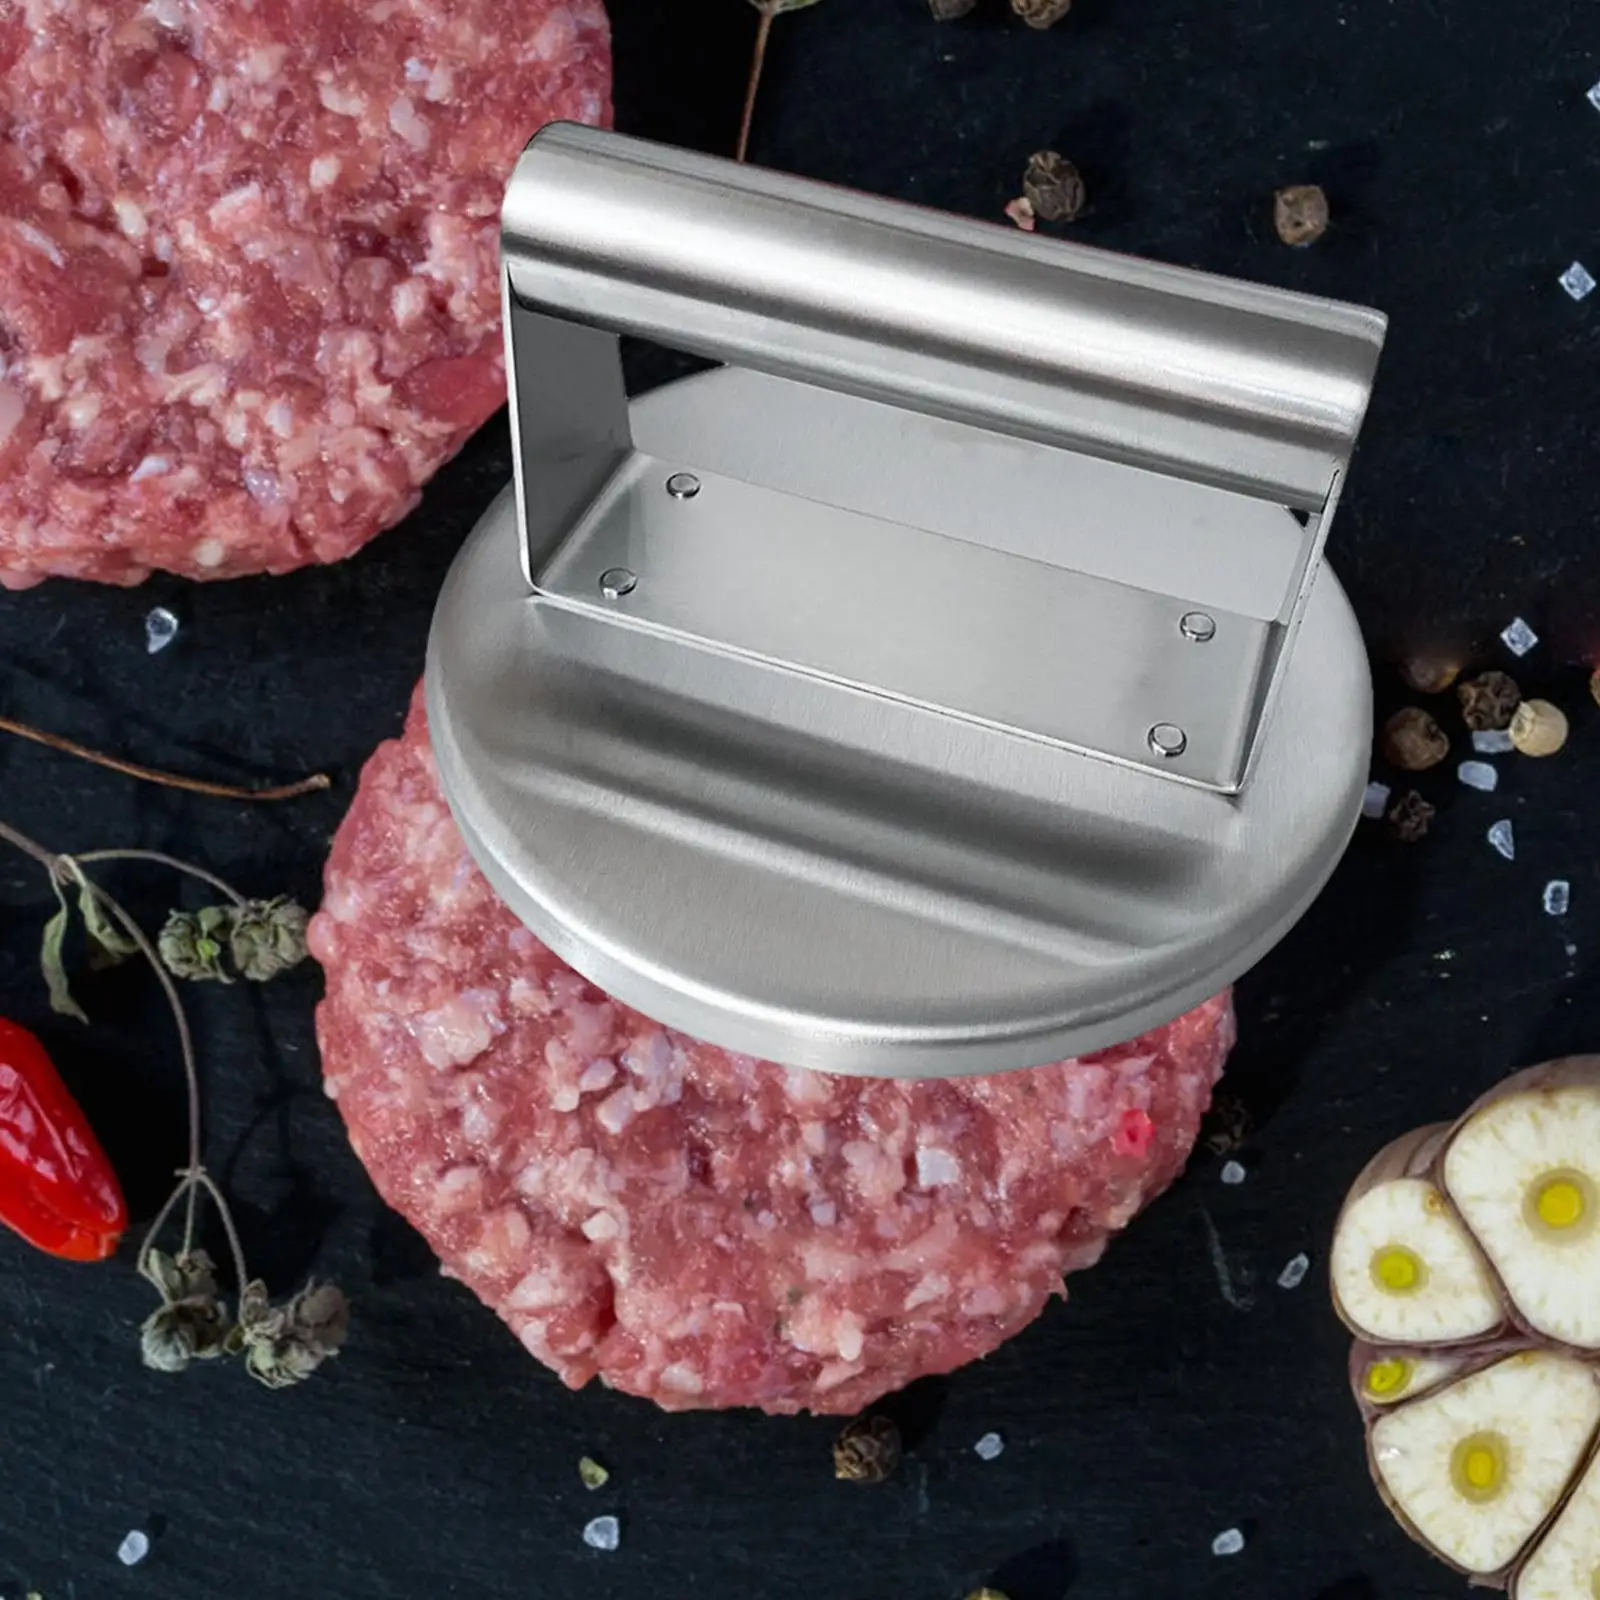 Press Burger Smasher Kitchen Gadgets Smooth Nonstick Round Meat Looser for Sandwiches Steak Flatbreads Barbecue BBQ Lover Gifts